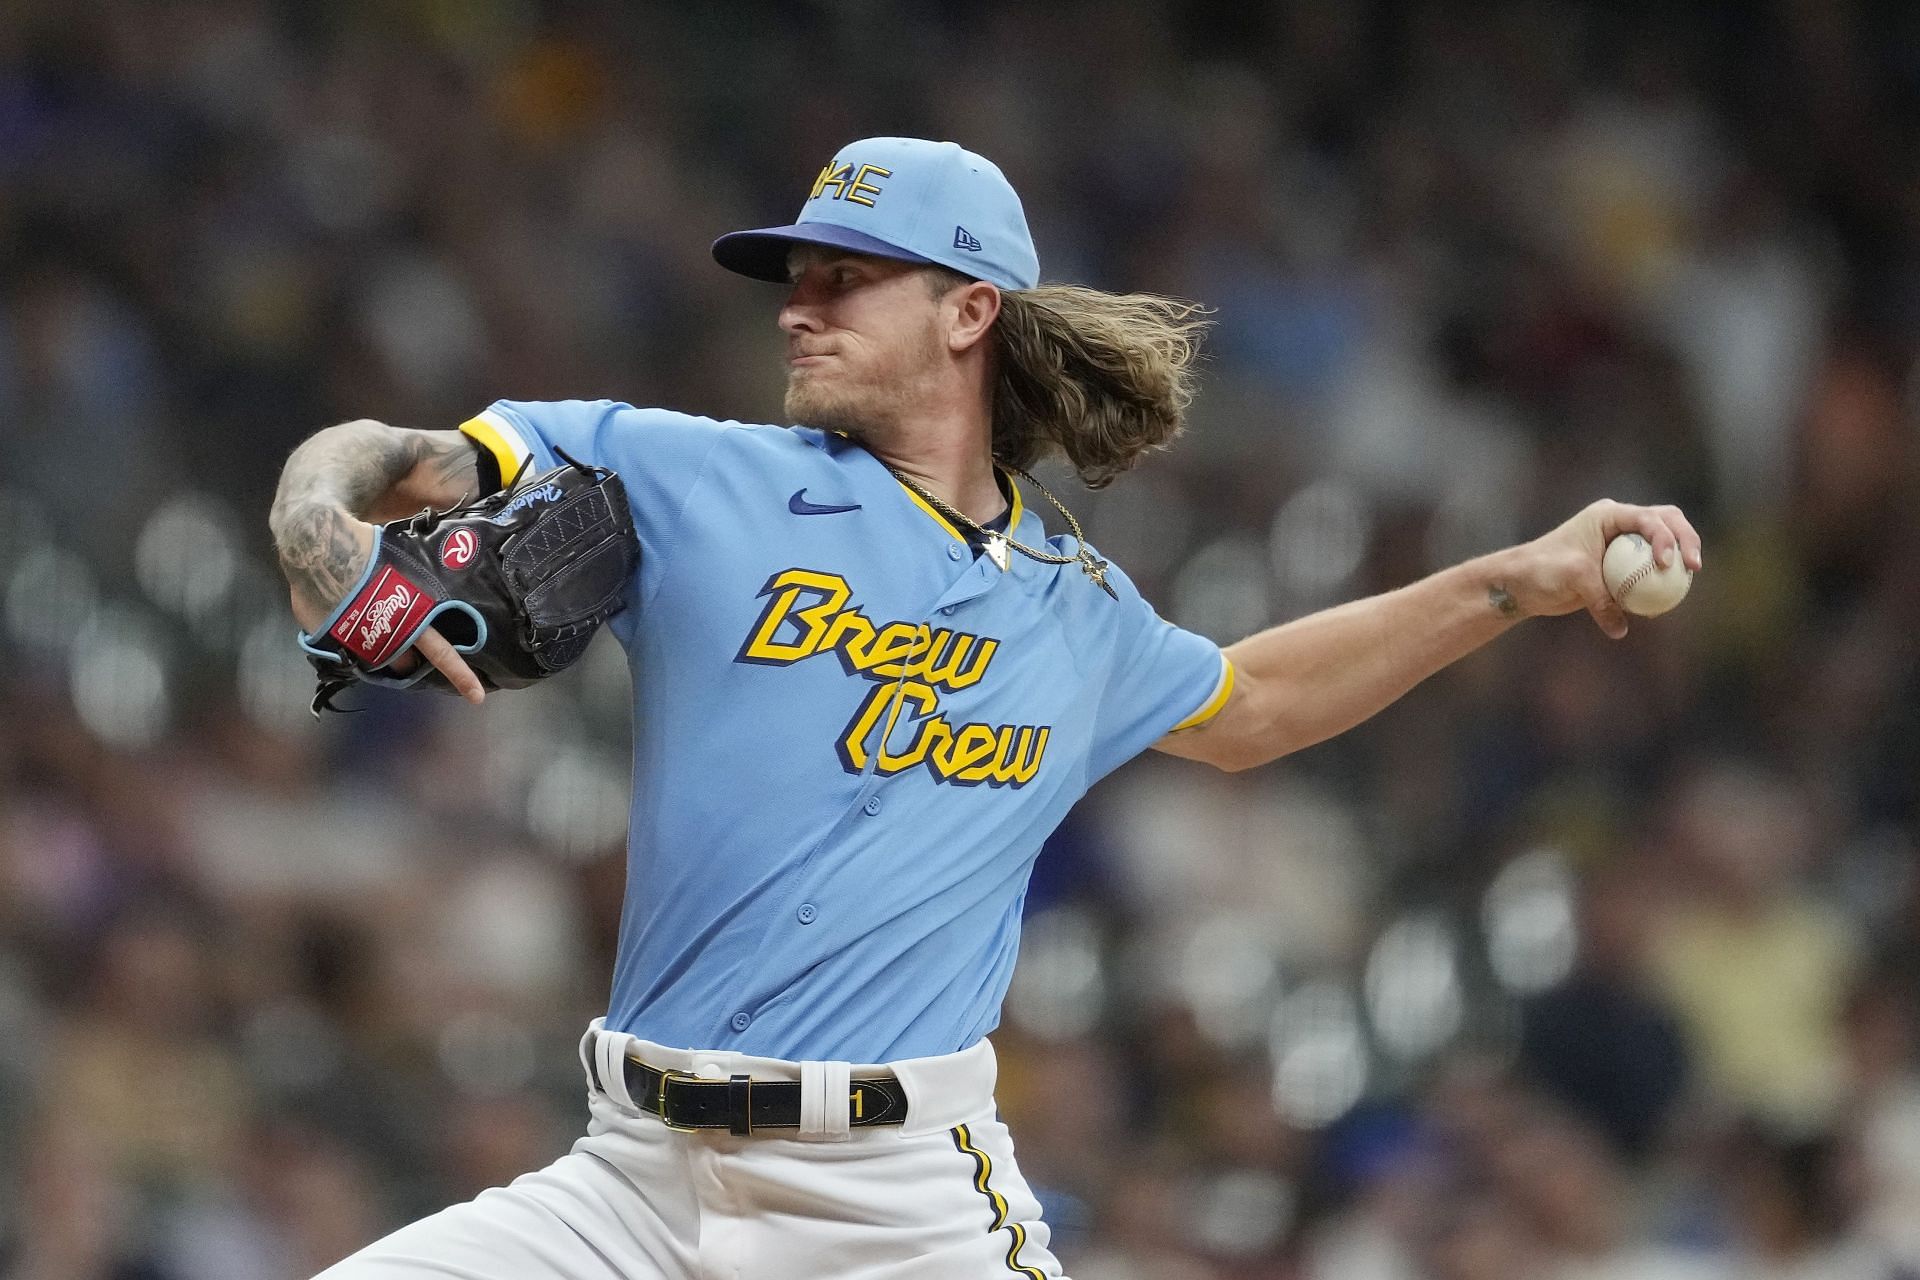 Josh Hader pitches during an MLB Pittsburgh Pirates v Milwaukee Brewers game in Milwaukee, Wisconsin.